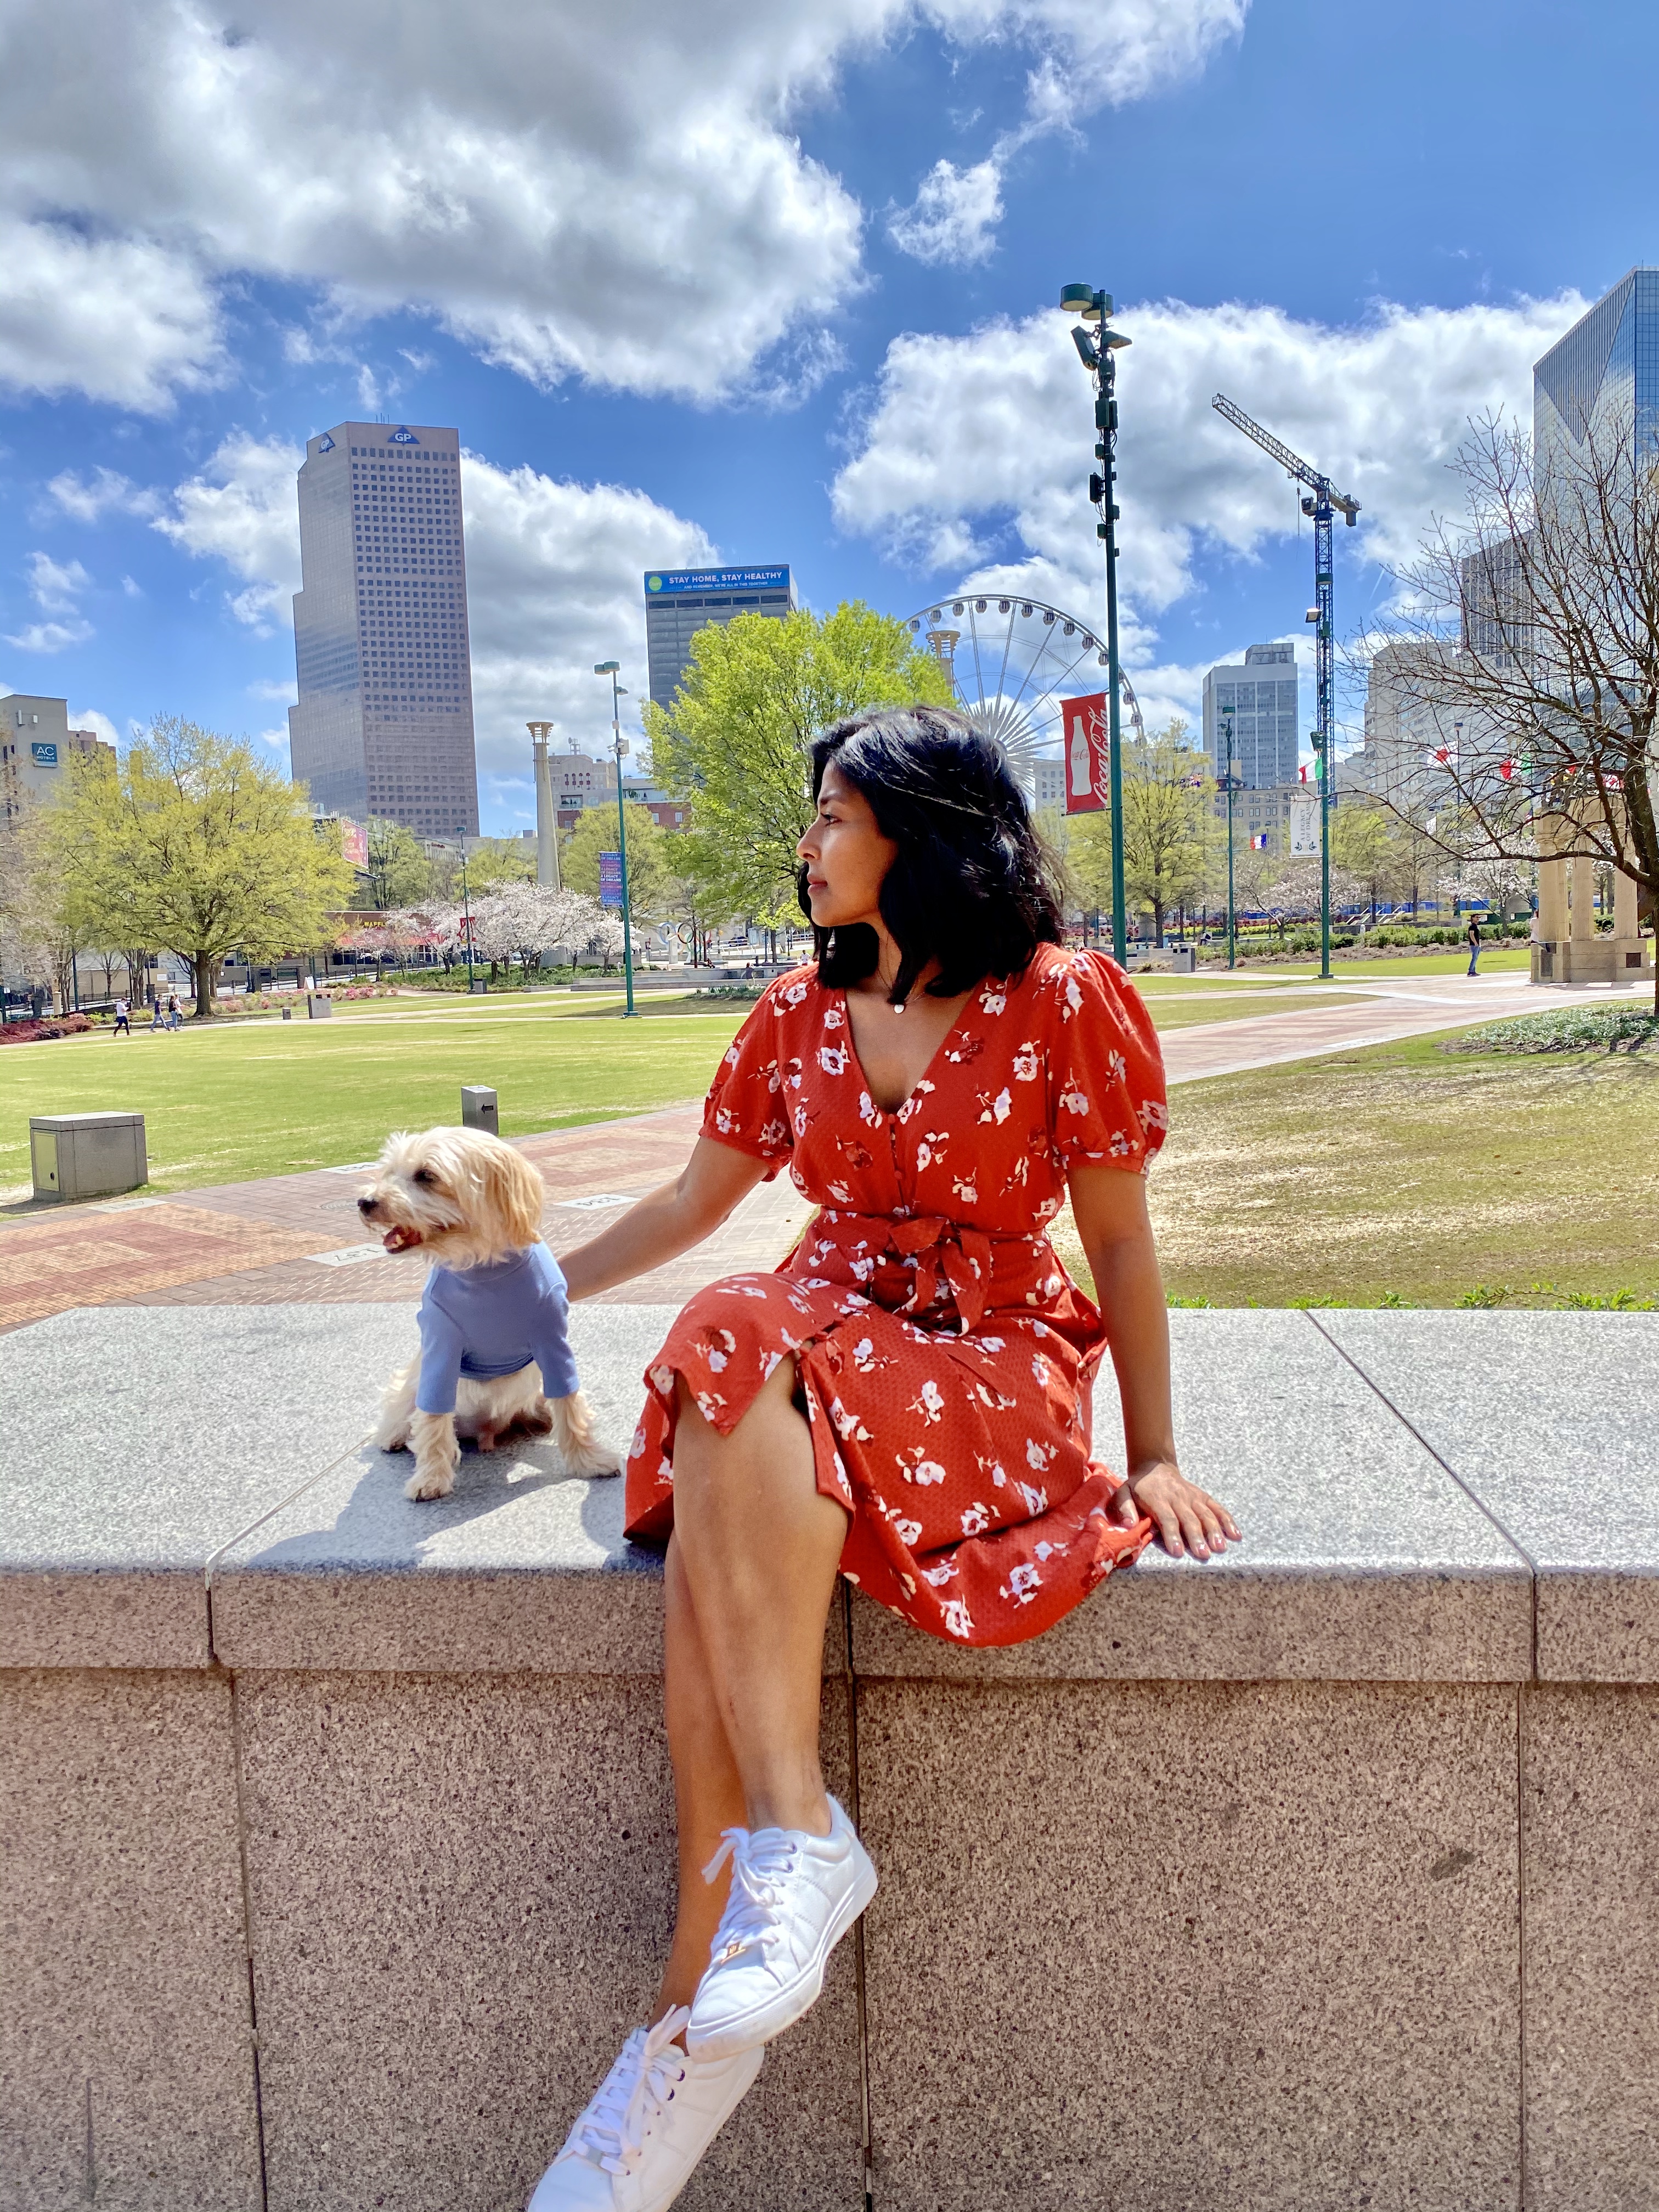 Best Instagrammable Places To Take Photos In Atlanta Centennial Olympic Park